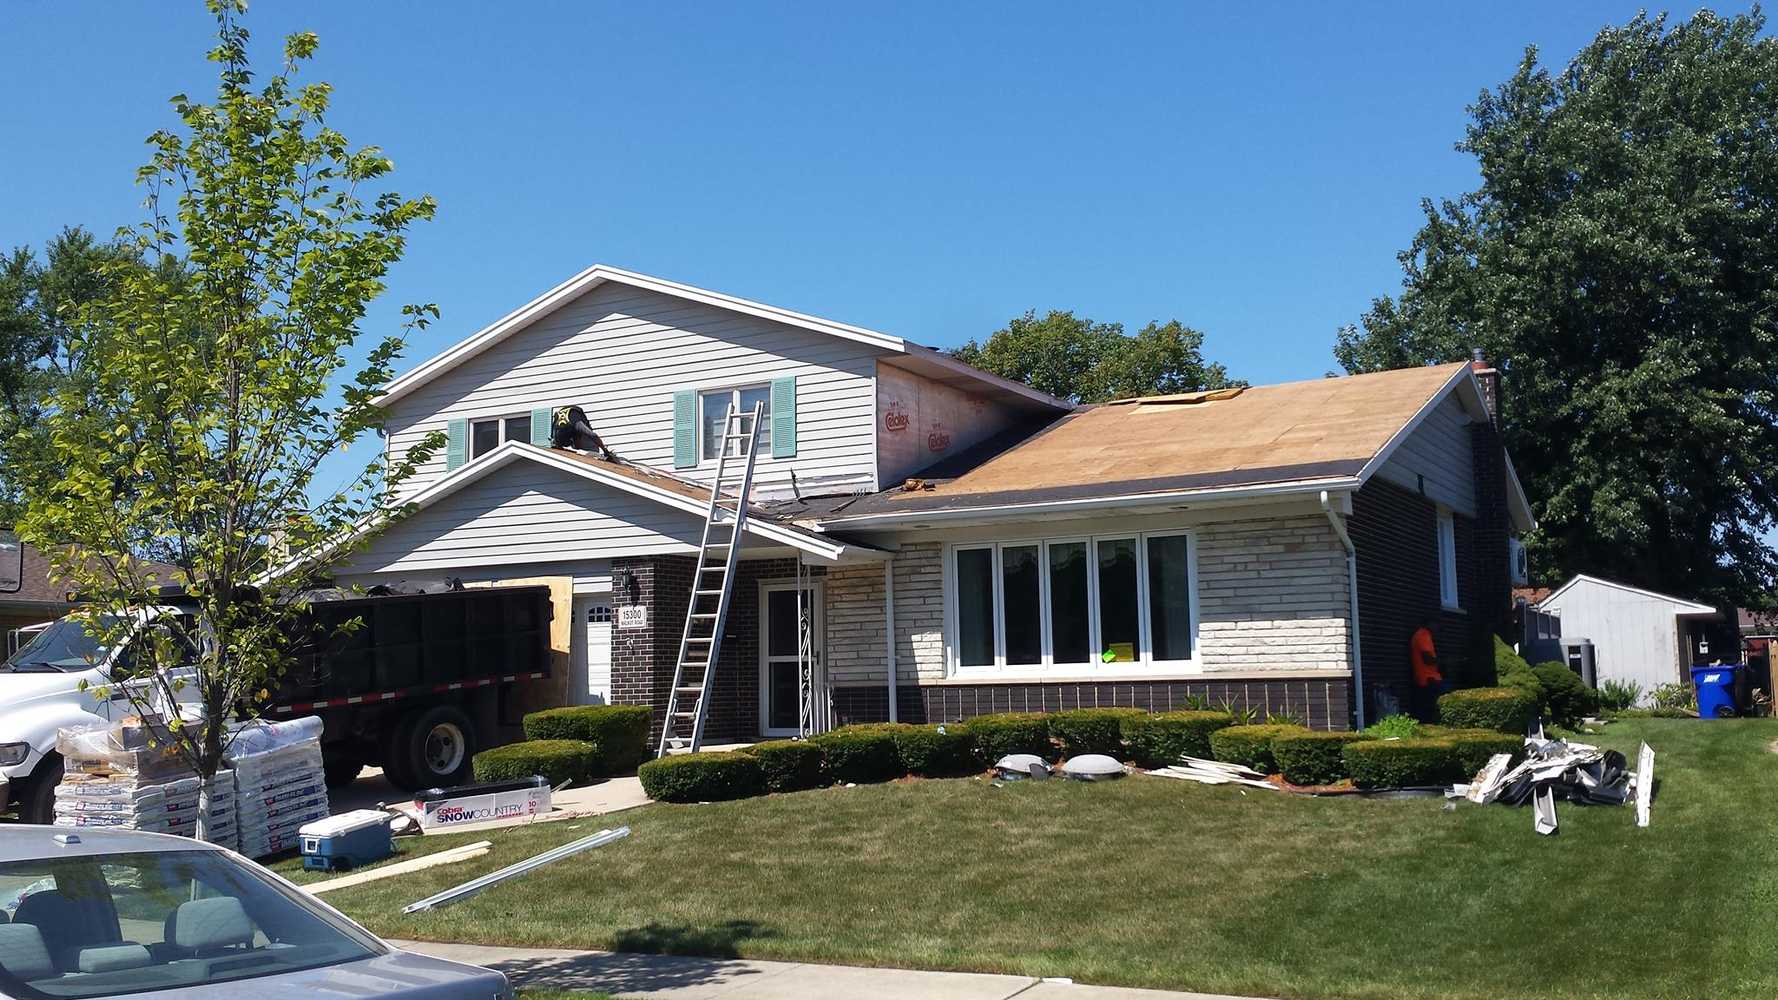 Another professional Roofing and windows installation by Certaseal Construction in Oak Forest, IL.